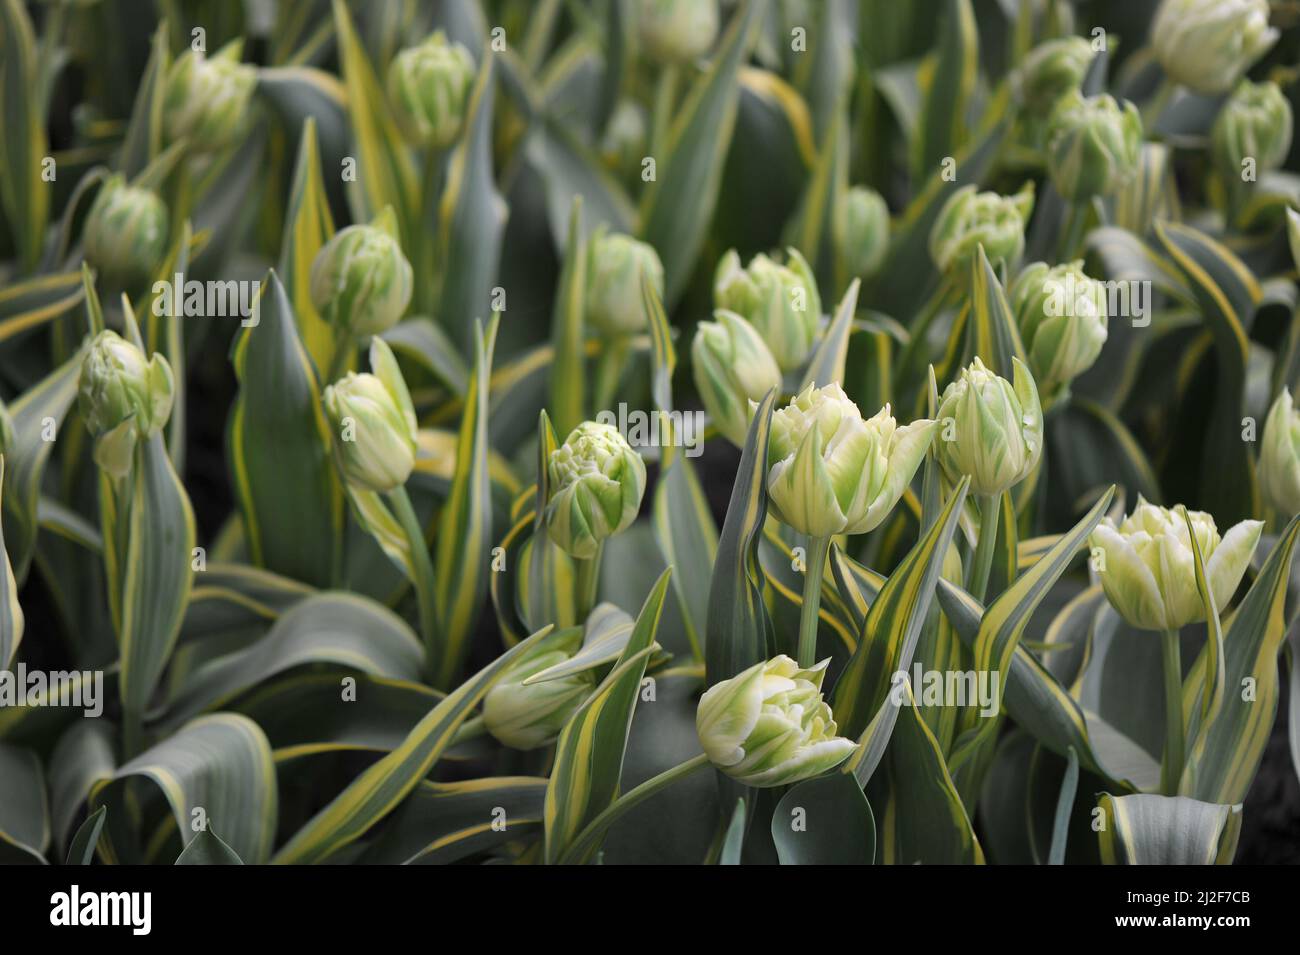 Creamy white peony-flowered Double Early tulips (Tulipa) Verona Design with variegated leaves bloom in a garden in March Stock Photo